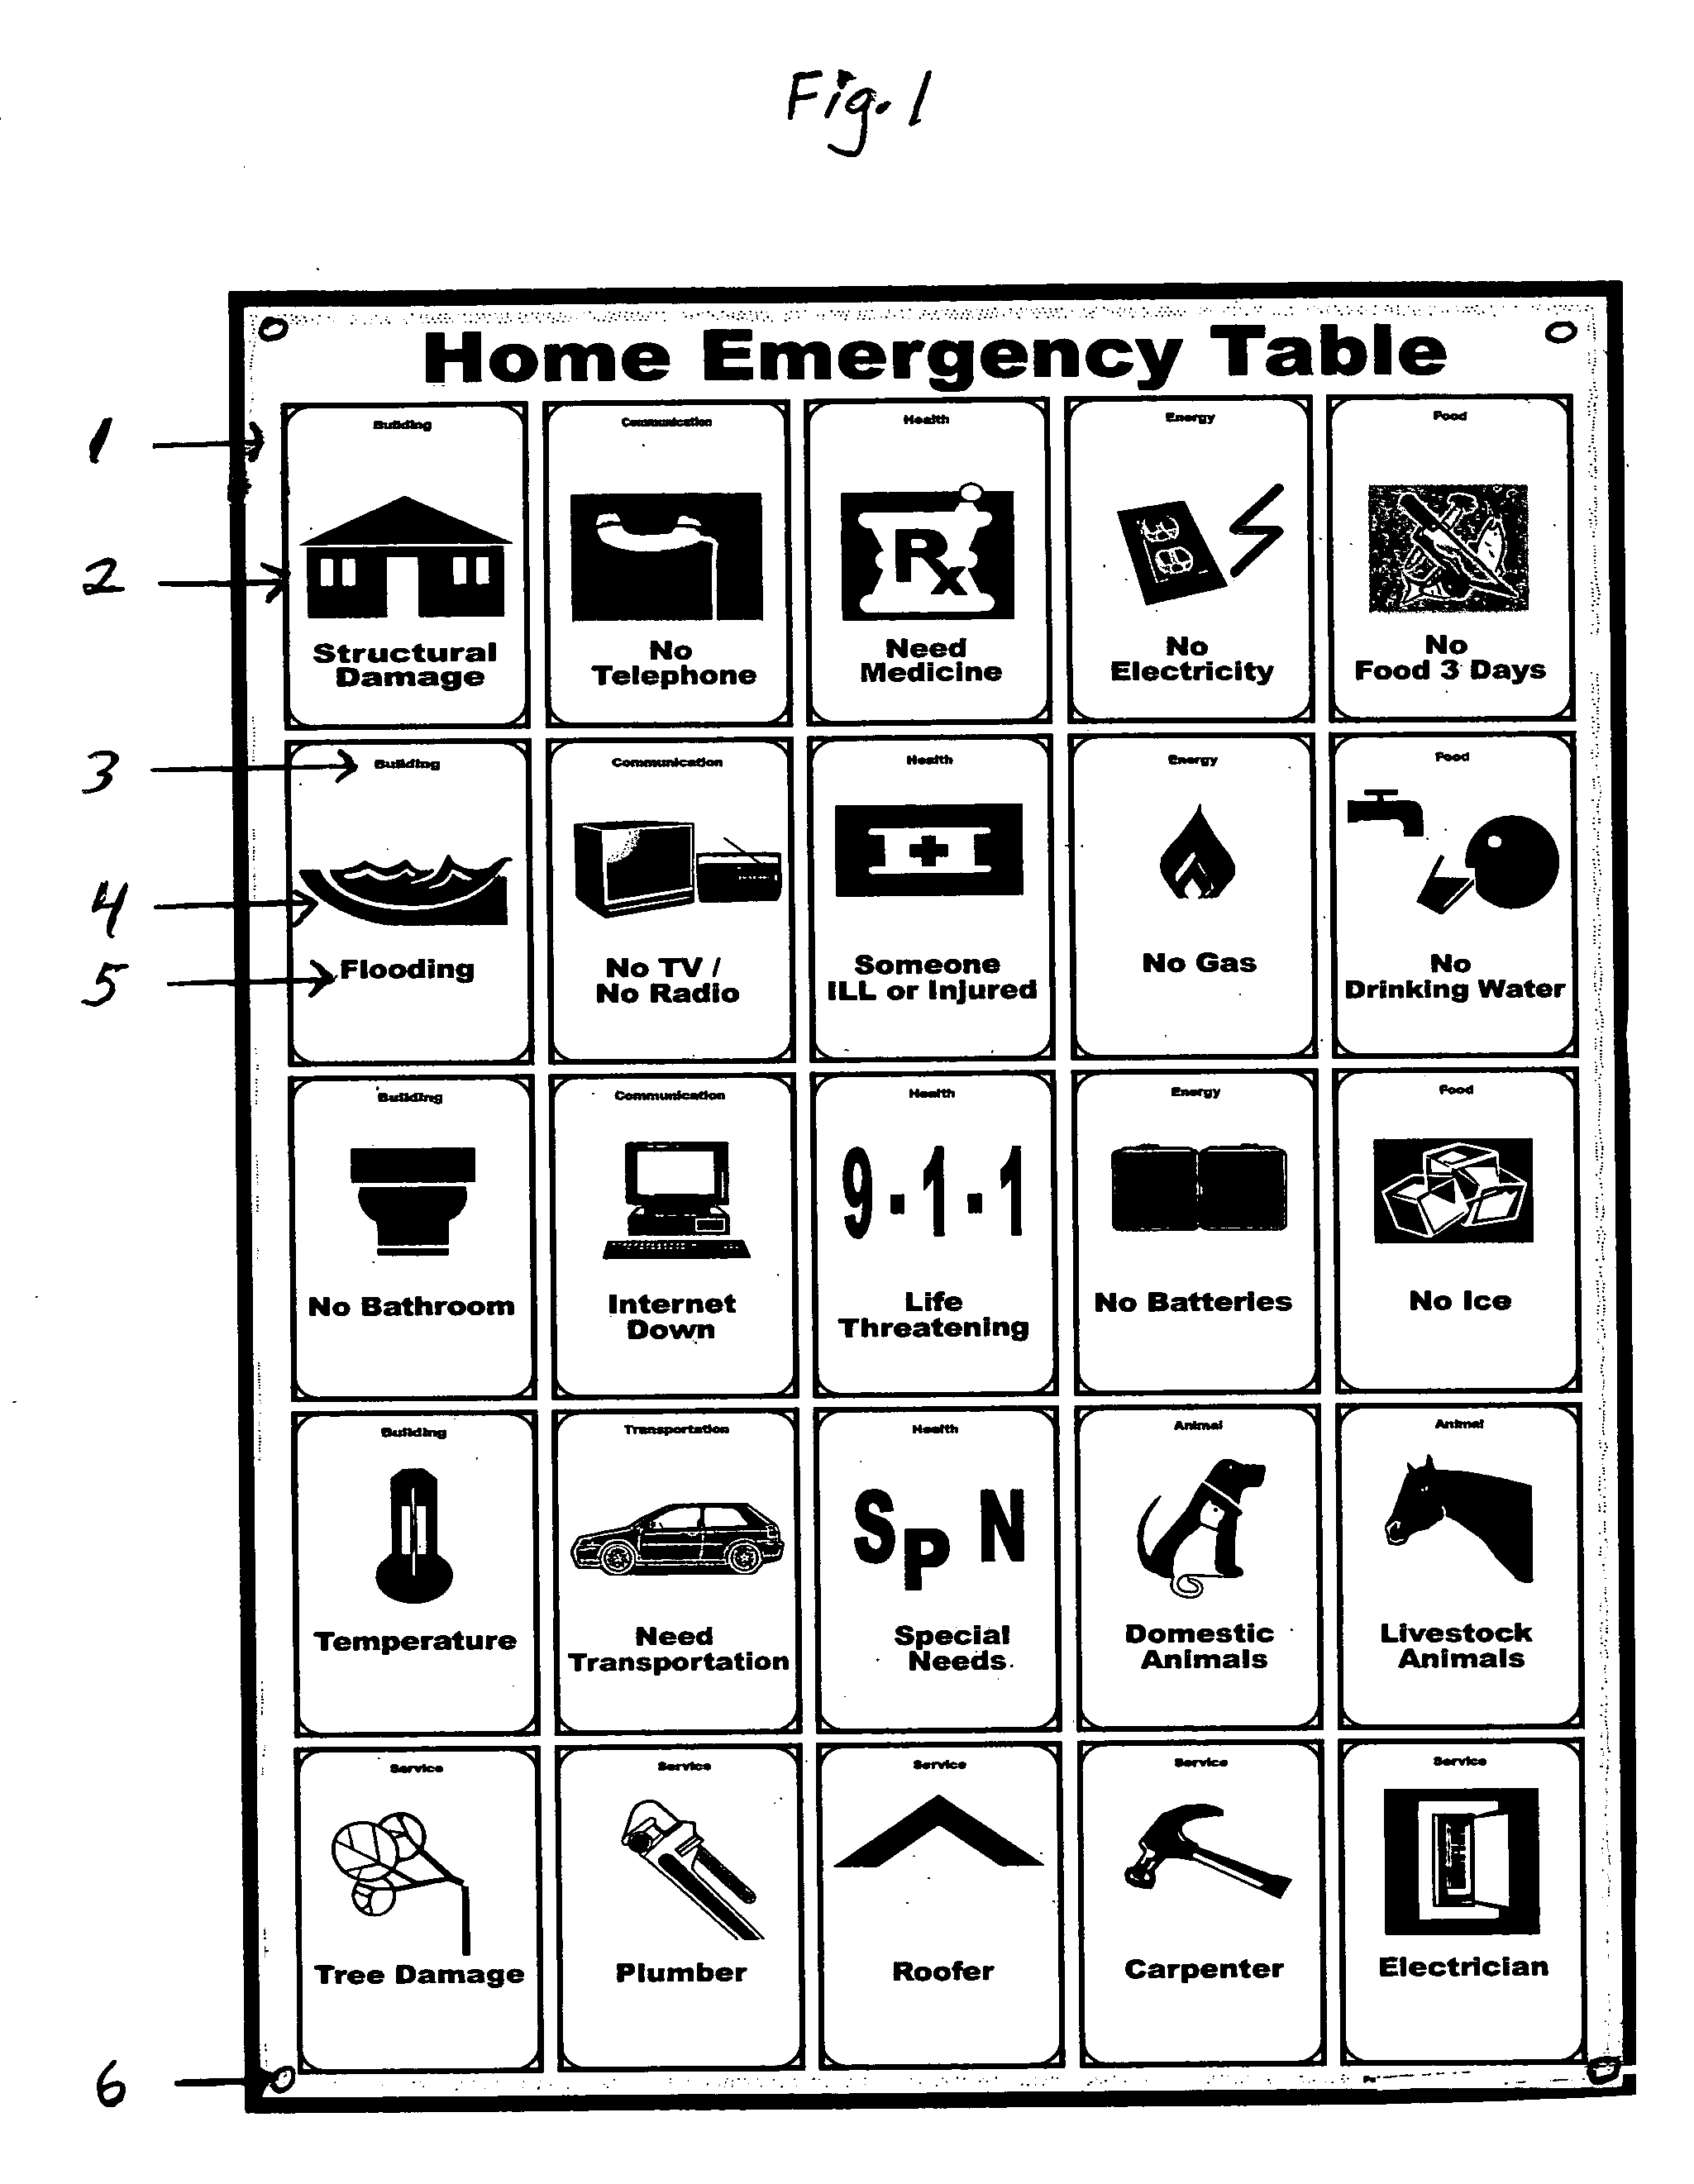 Home emergency sign - the home emergency table (HET)